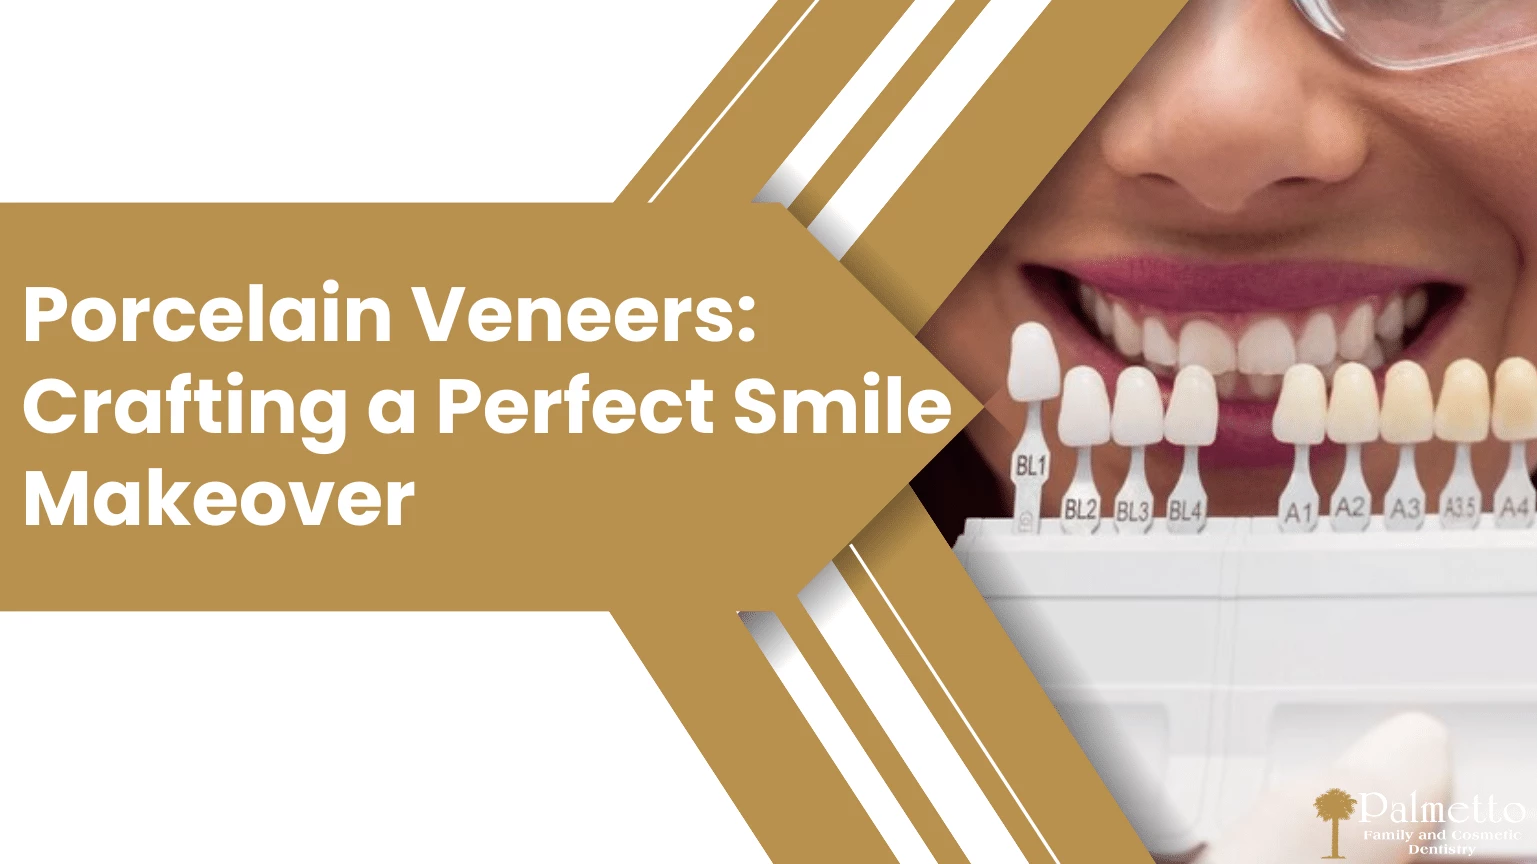 Porcelain Veneers Crafting a Perfect Smile Makeover